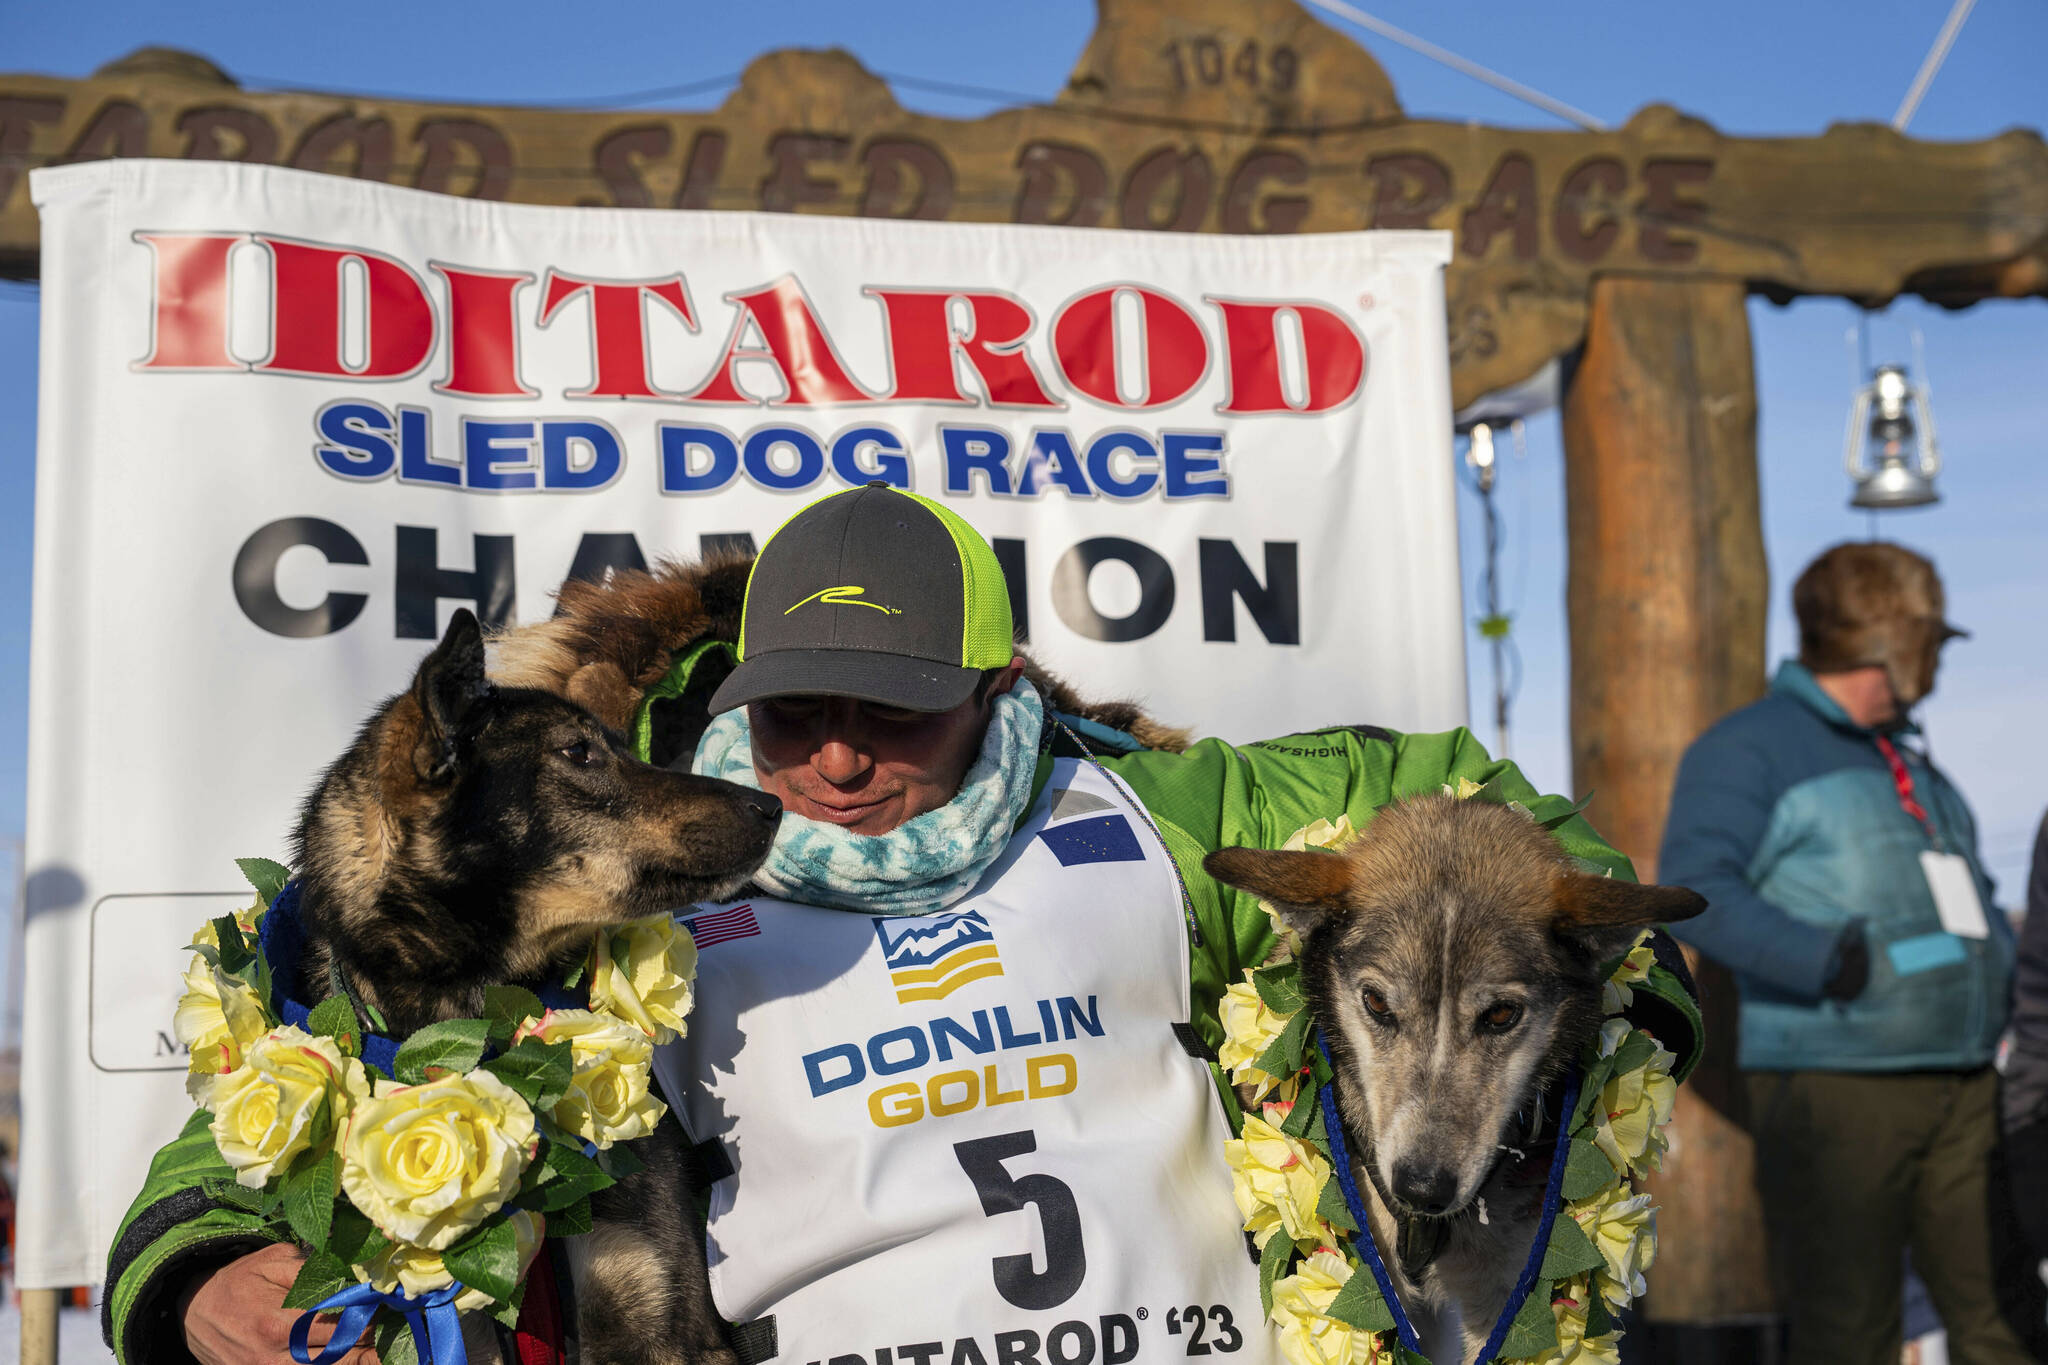 Ryan Redington poses with his lead dogs Sven, left, and Ghost, after he won the 2023 Iditarod Trail Sled Dog Race, Tuesday, March 14, 2023 in Nome, Alaska. Redington, 40, is the grandson of Joe Redington Sr., who helped co-found the arduous race across Alaska that was first held in 1973 and is known as the “Father of the Iditarod.”  (Loren Holmes / Anchorage Daily News)